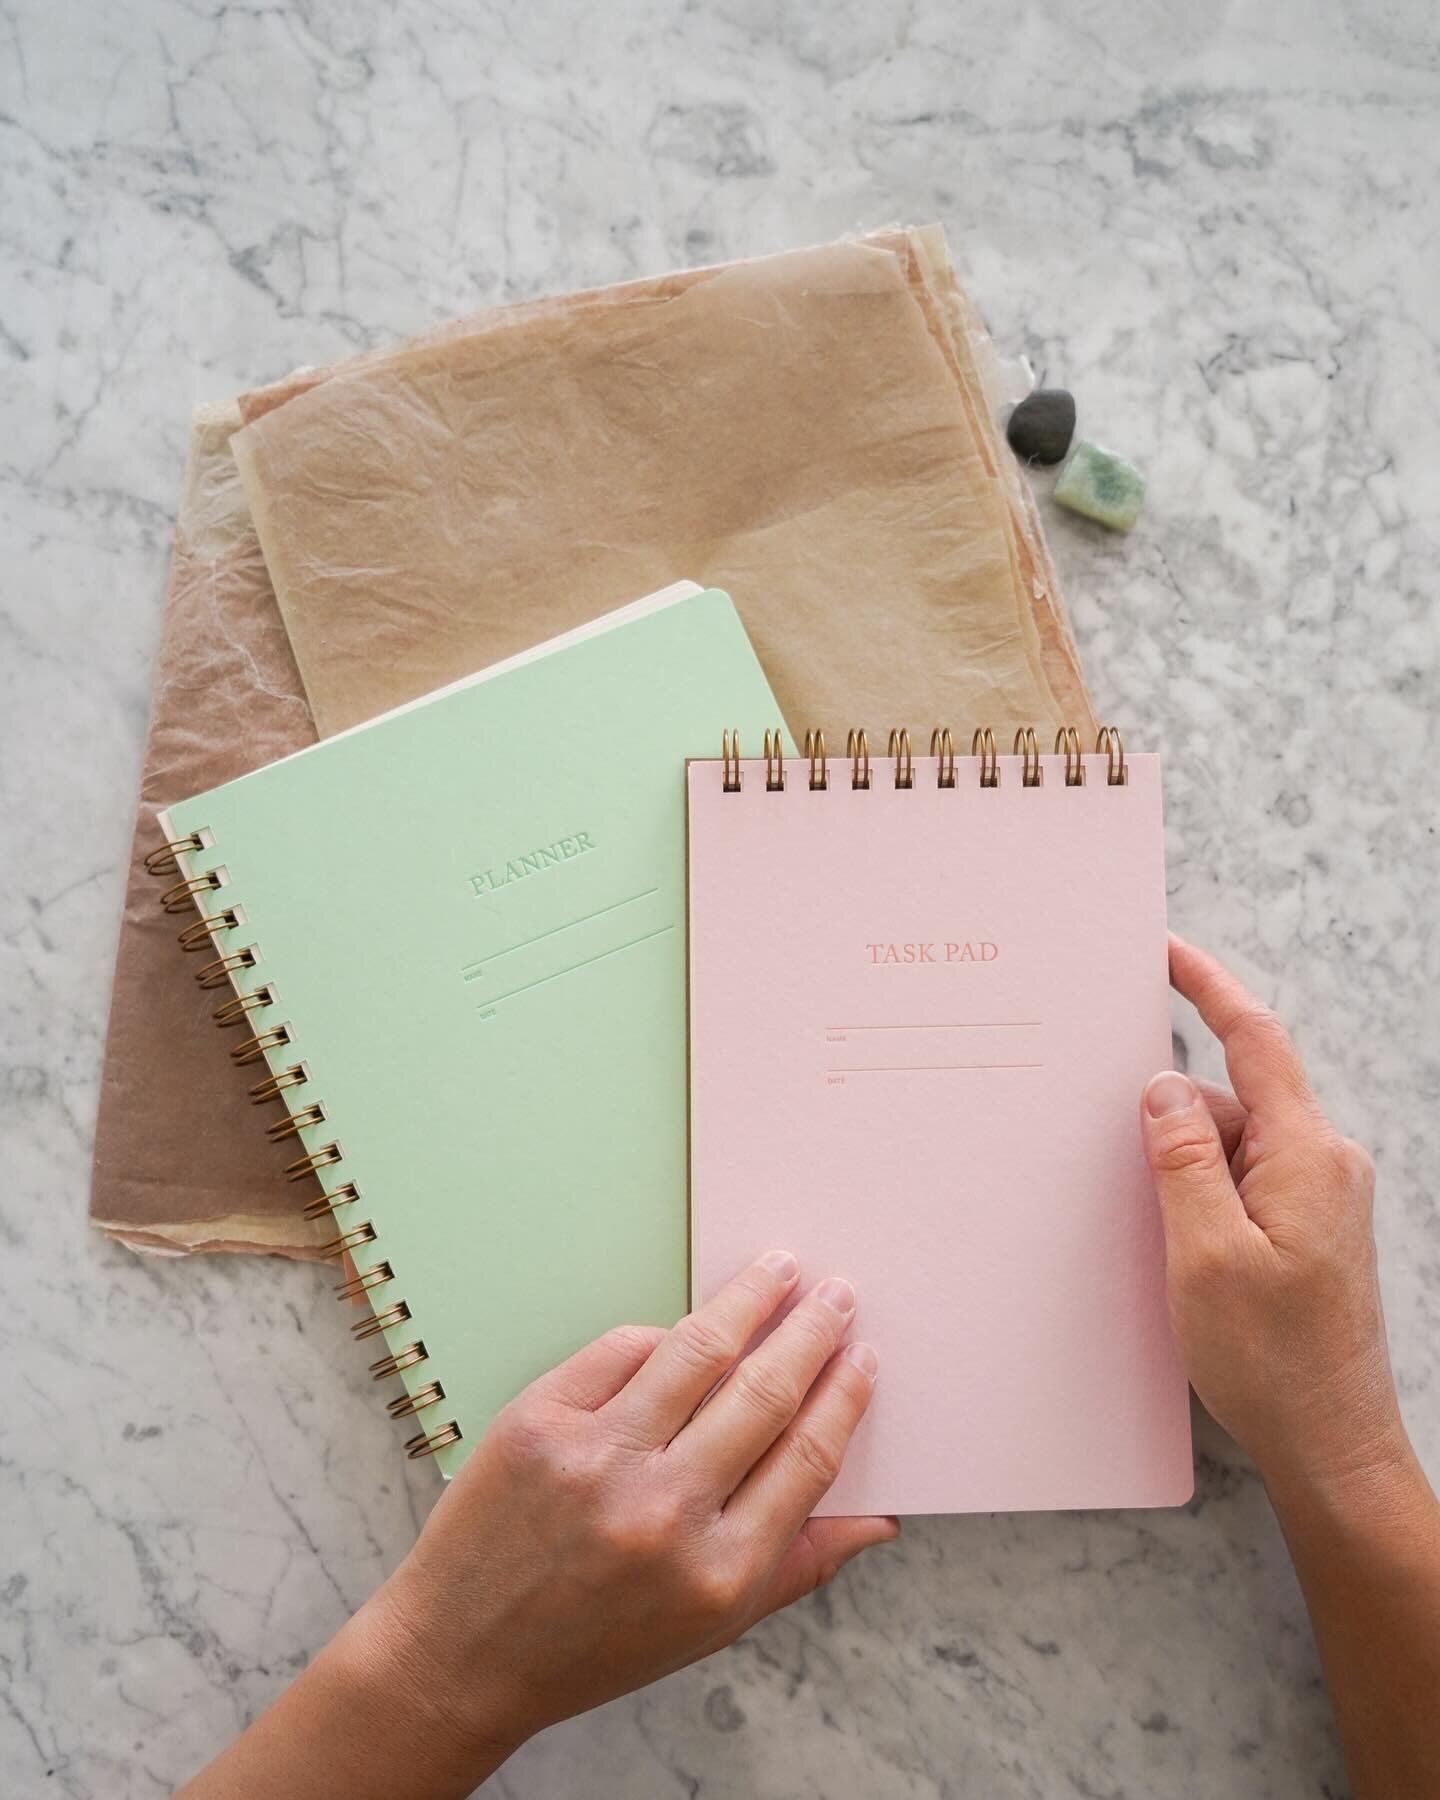 Each year, I choose out a new planner and also make a new journal to record my thoughts, dreams, and moments that I wish to remember.  This year, I&rsquo;ve successfully made my new handbound journal and chosen to use my Shorthand Press Planner and T